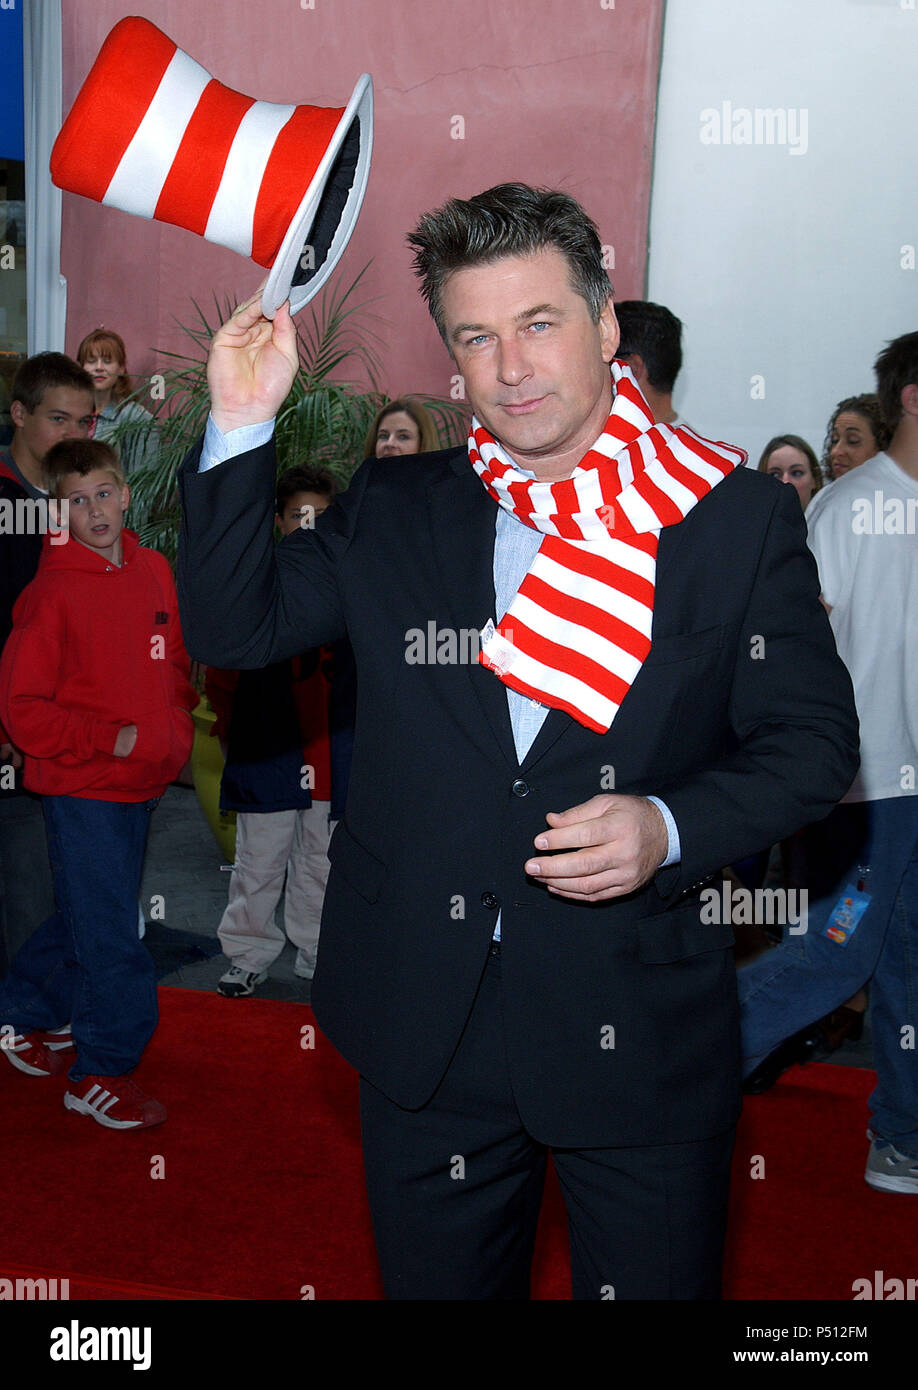 Alec Baldwin arriving at the ' Dr. Seuss 'The Cat In The Hat Premiere '   at the Universal Amphitheatre in Los Angeles. November 8, 2003.BaldwinAlec81 Red Carpet Event, Vertical, USA, Film Industry, Celebrities,  Photography, Bestof, Arts Culture and Entertainment, Topix Celebrities fashion /  Vertical, Best of, Event in Hollywood Life - California,  Red Carpet and backstage, USA, Film Industry, Celebrities,  movie celebrities, TV celebrities, Music celebrities, Photography, Bestof, Arts Culture and Entertainment,  Topix, vertical, one person,, from the years , 2003 to 2005, inquiry tsuni@Gamm Stock Photo